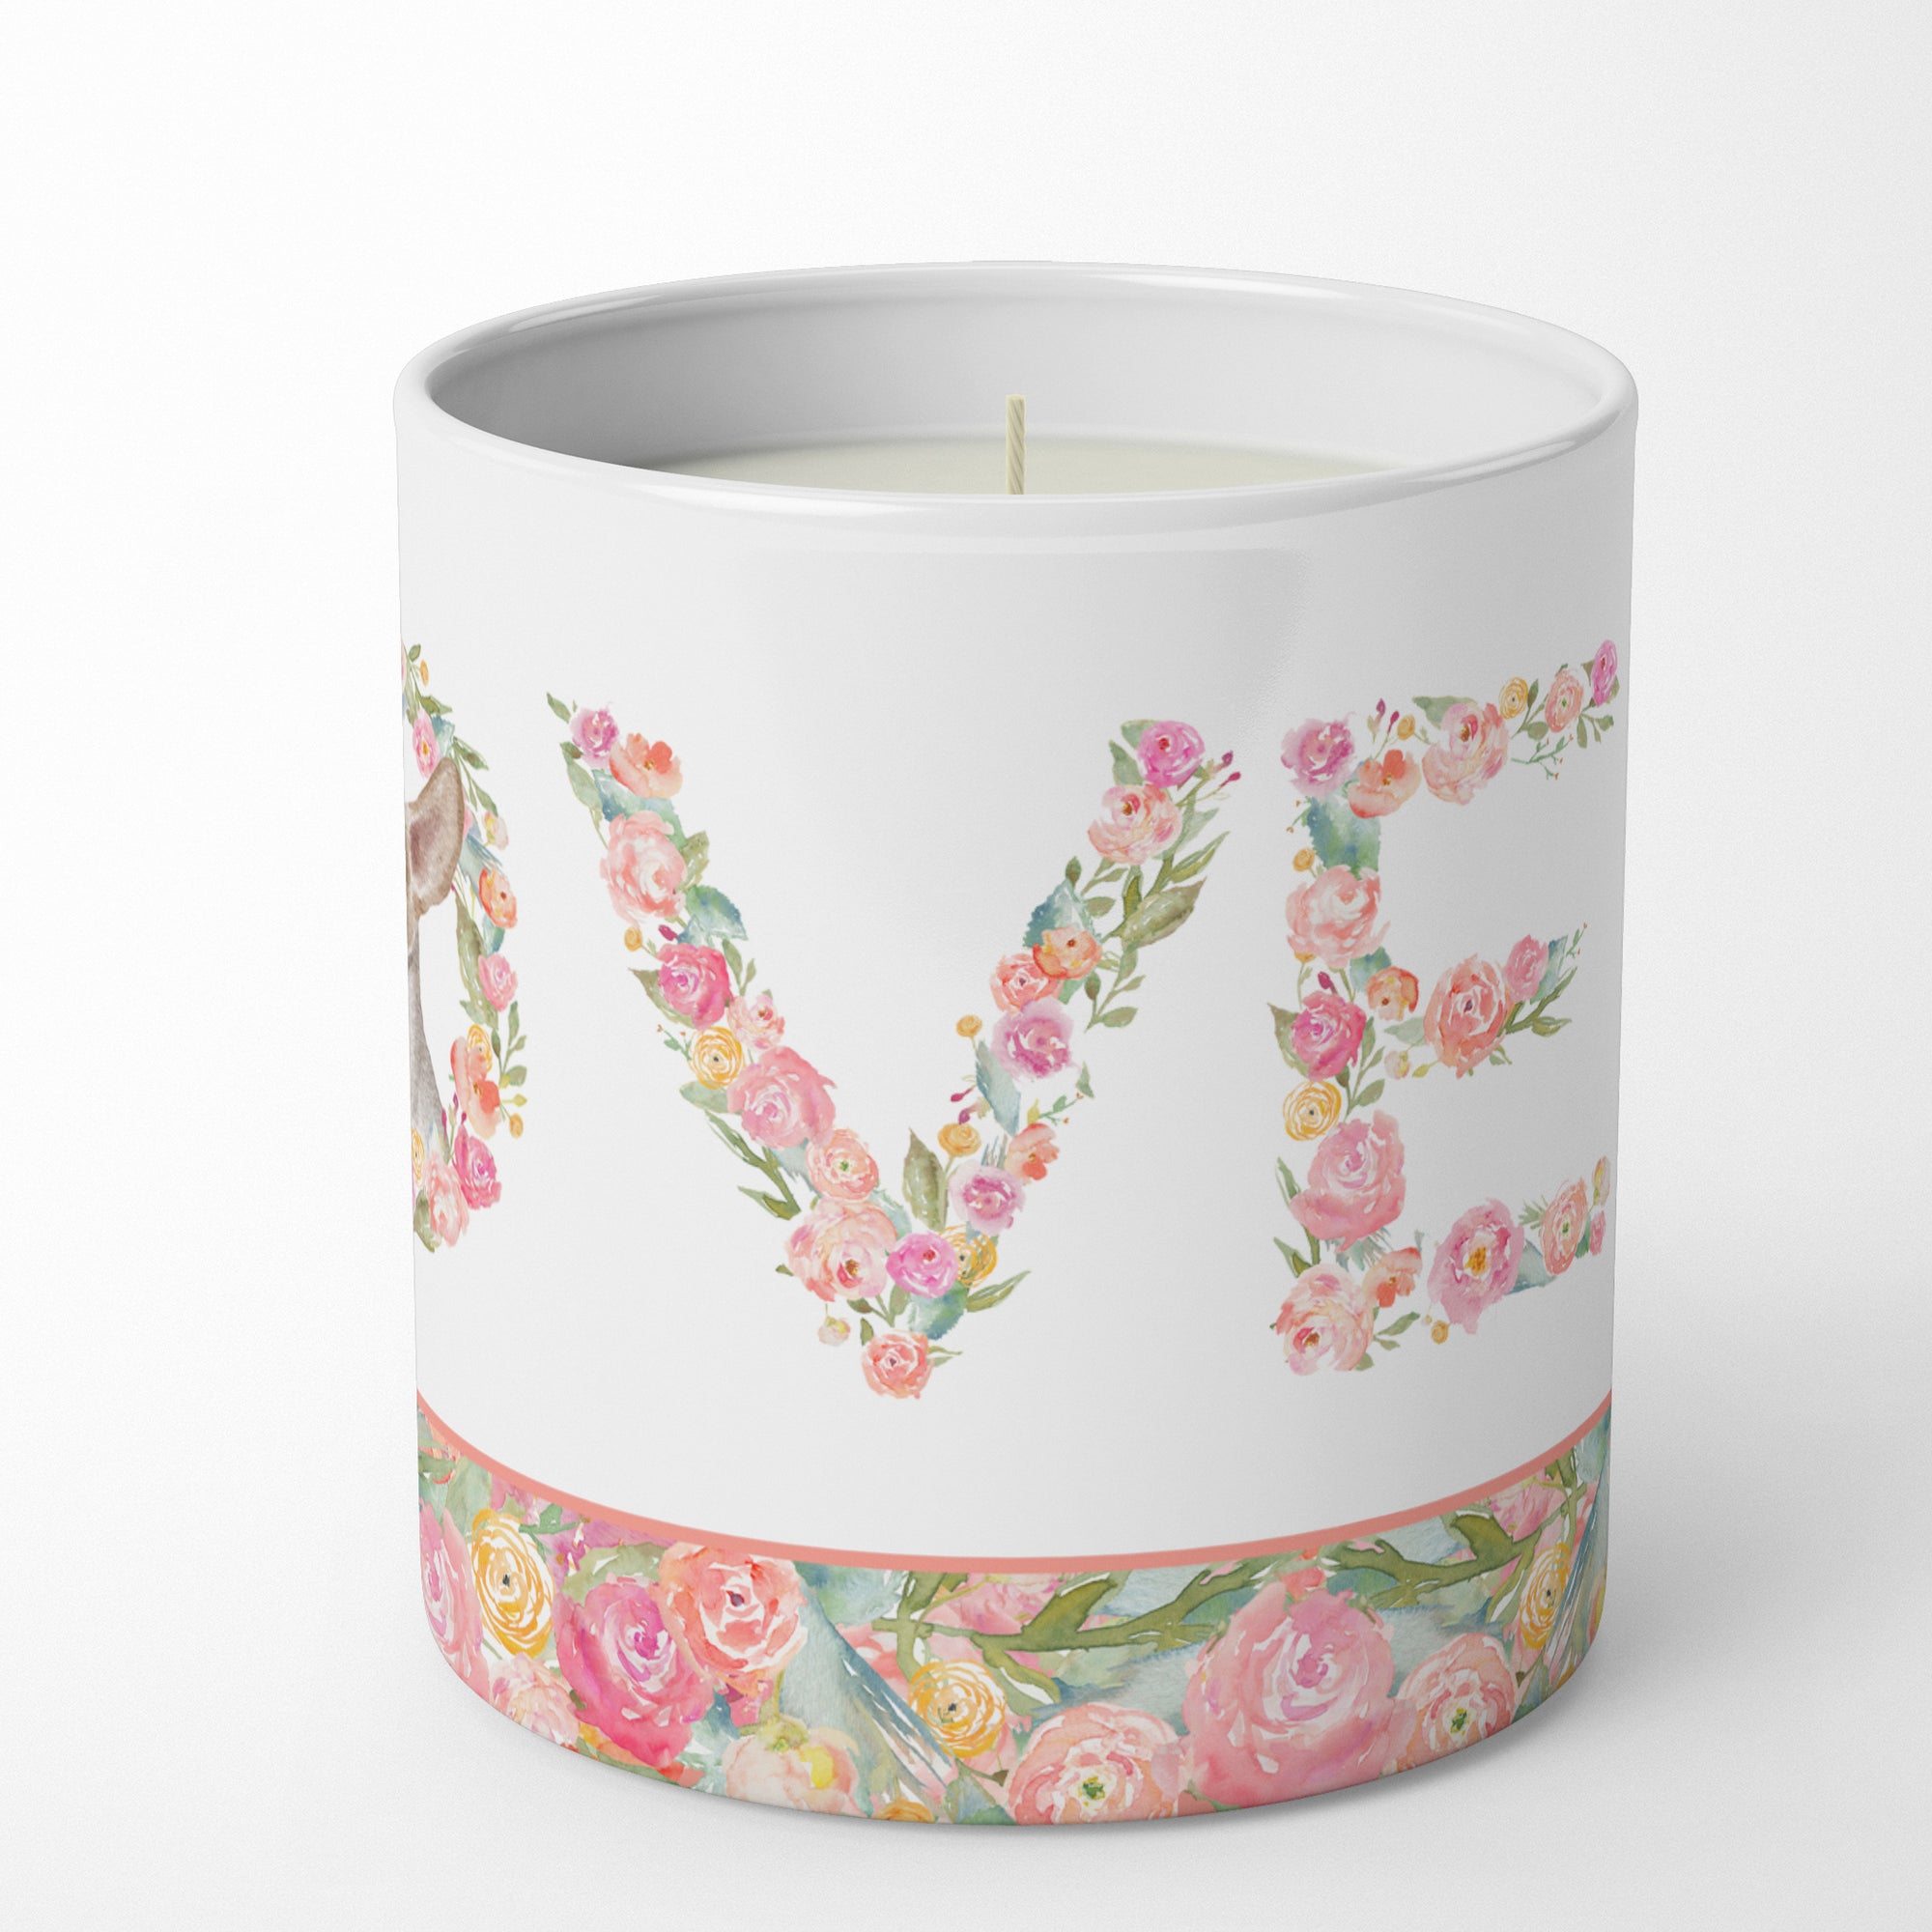 Ibizan Hound #2 LOVE 10 oz Decorative Soy Candle - the-store.com